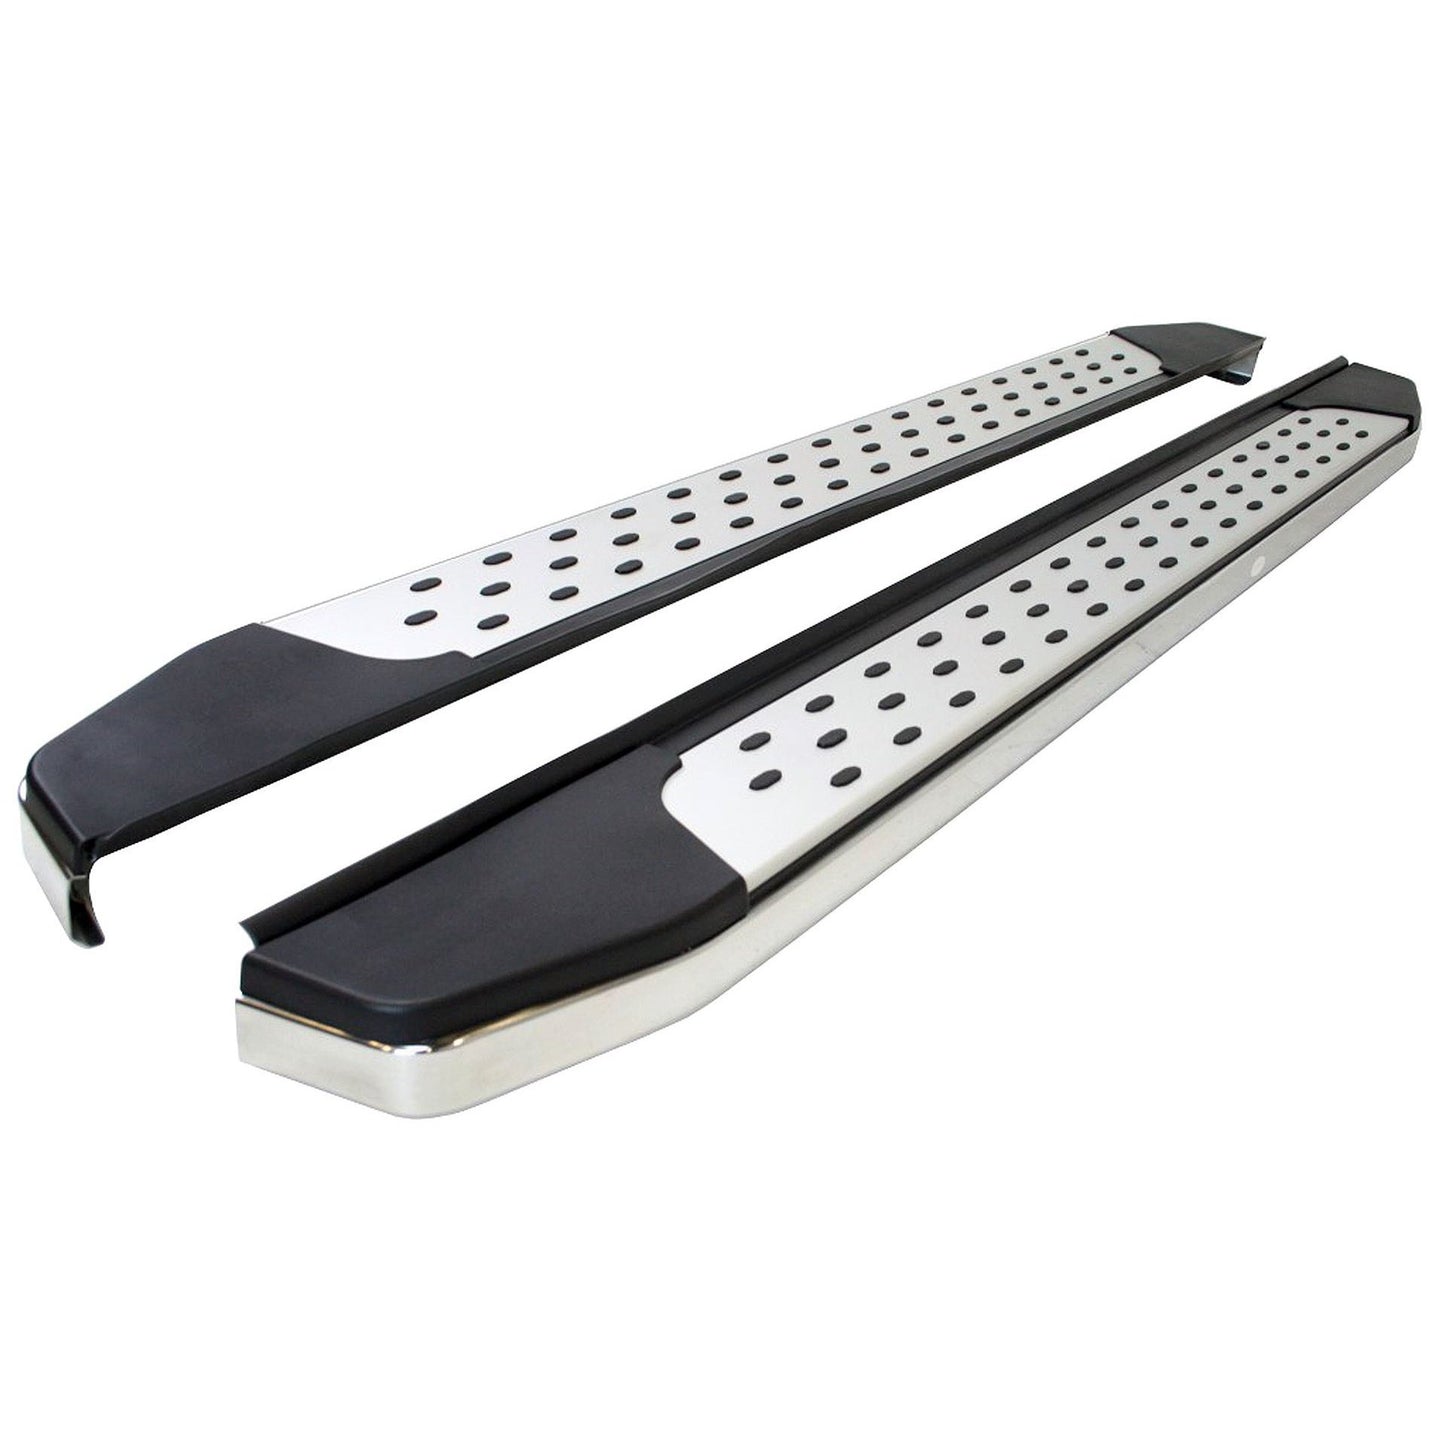 Freedom Side Steps Running Boards for Range Rover Evoque Pure & Prestige 11-18 -  - sold by Direct4x4